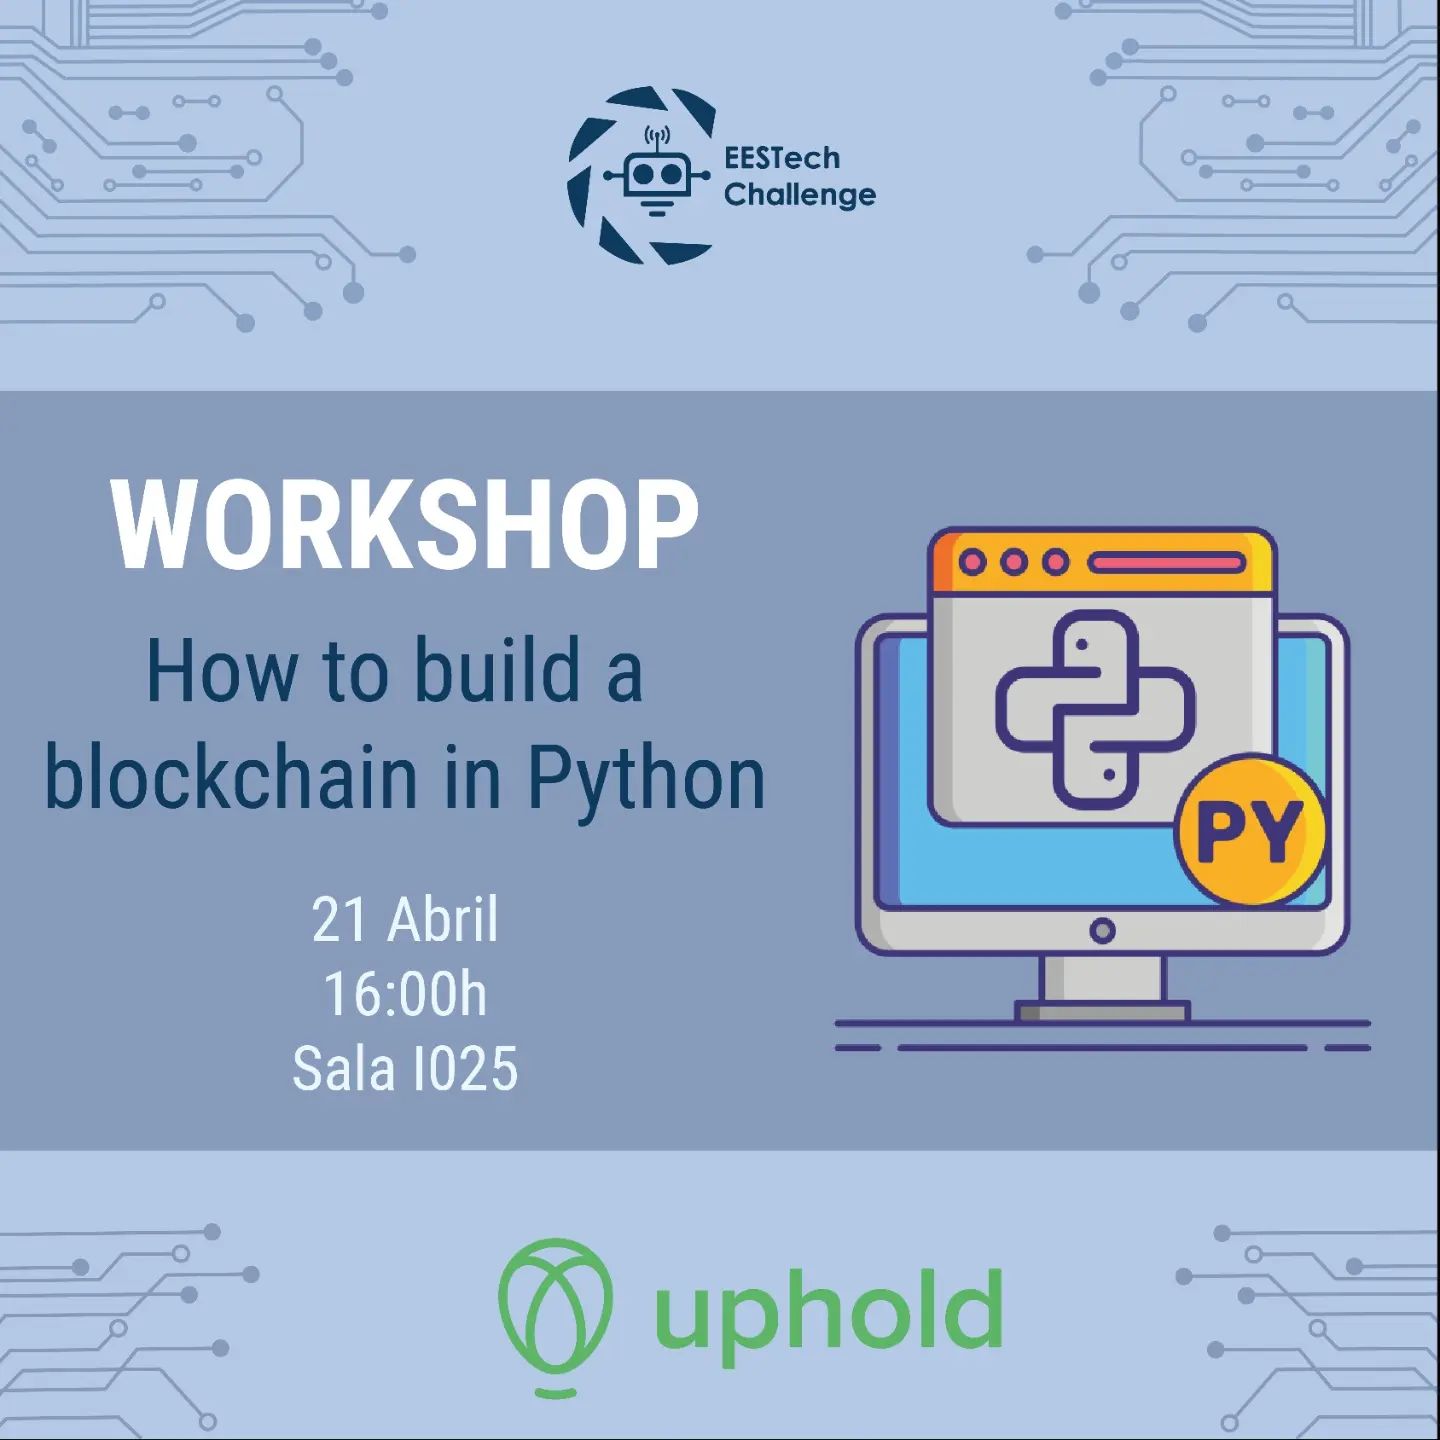 Workshop “How to build a blockchain in Python” by Uphold